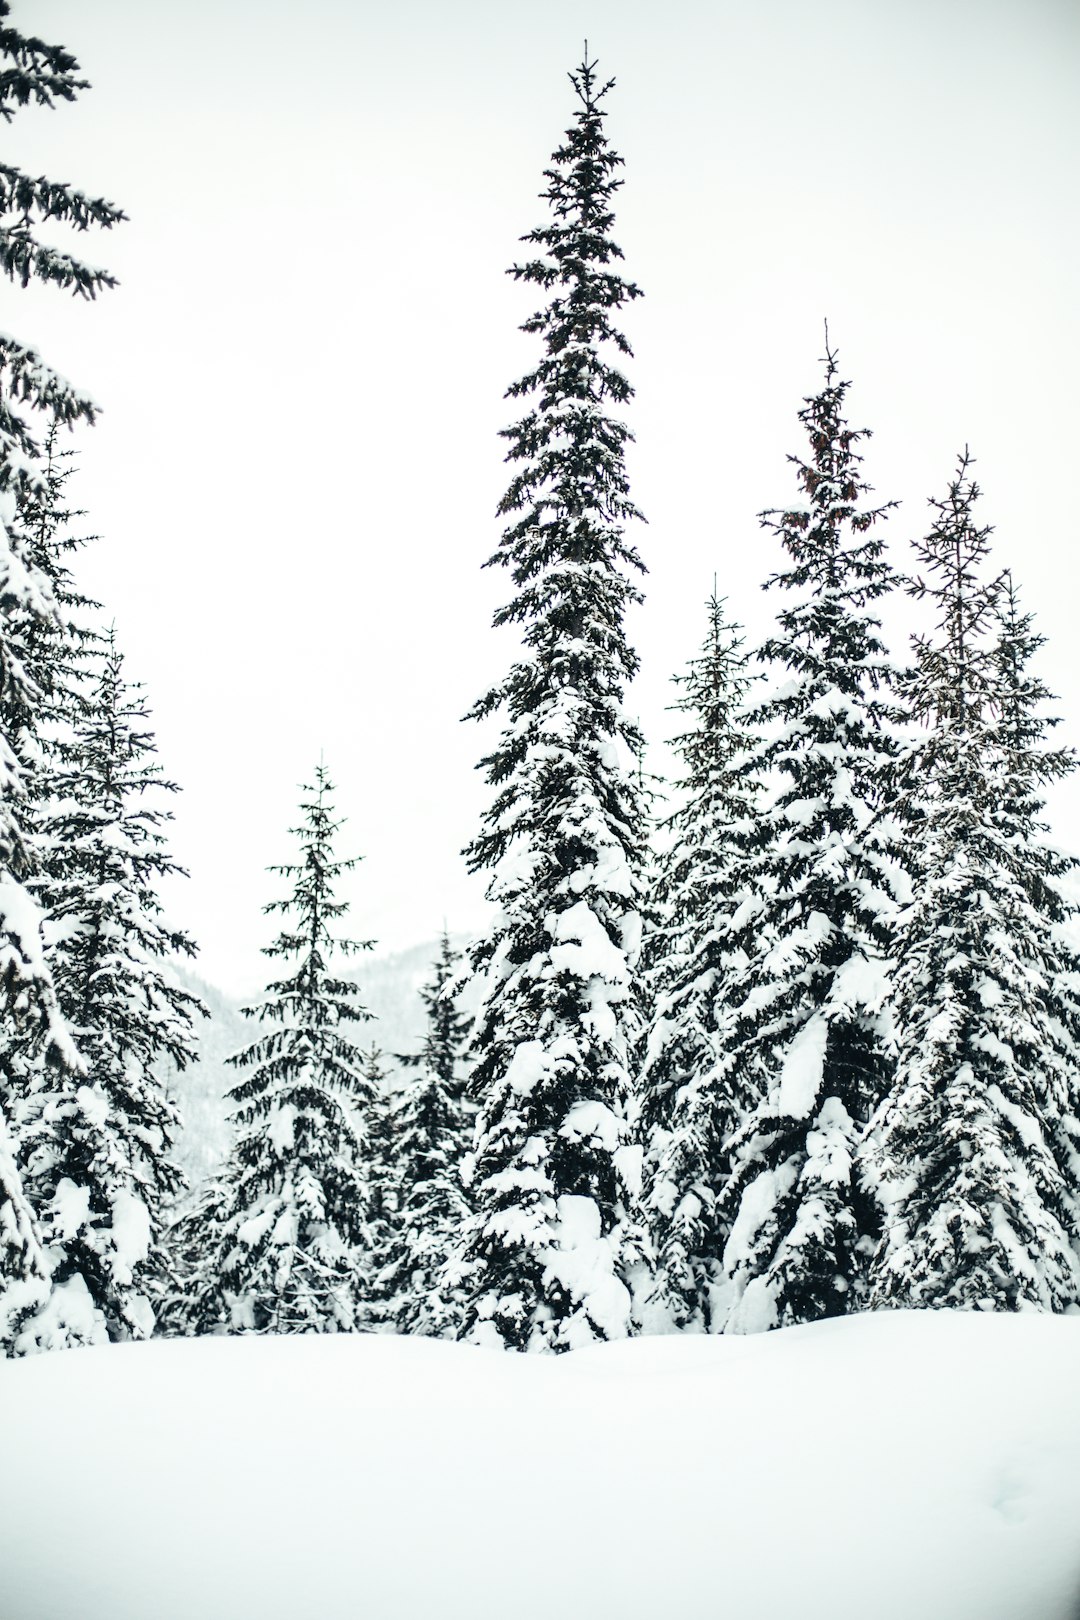 travelers stories about Spruce-fir forest in British Columbia, Canada